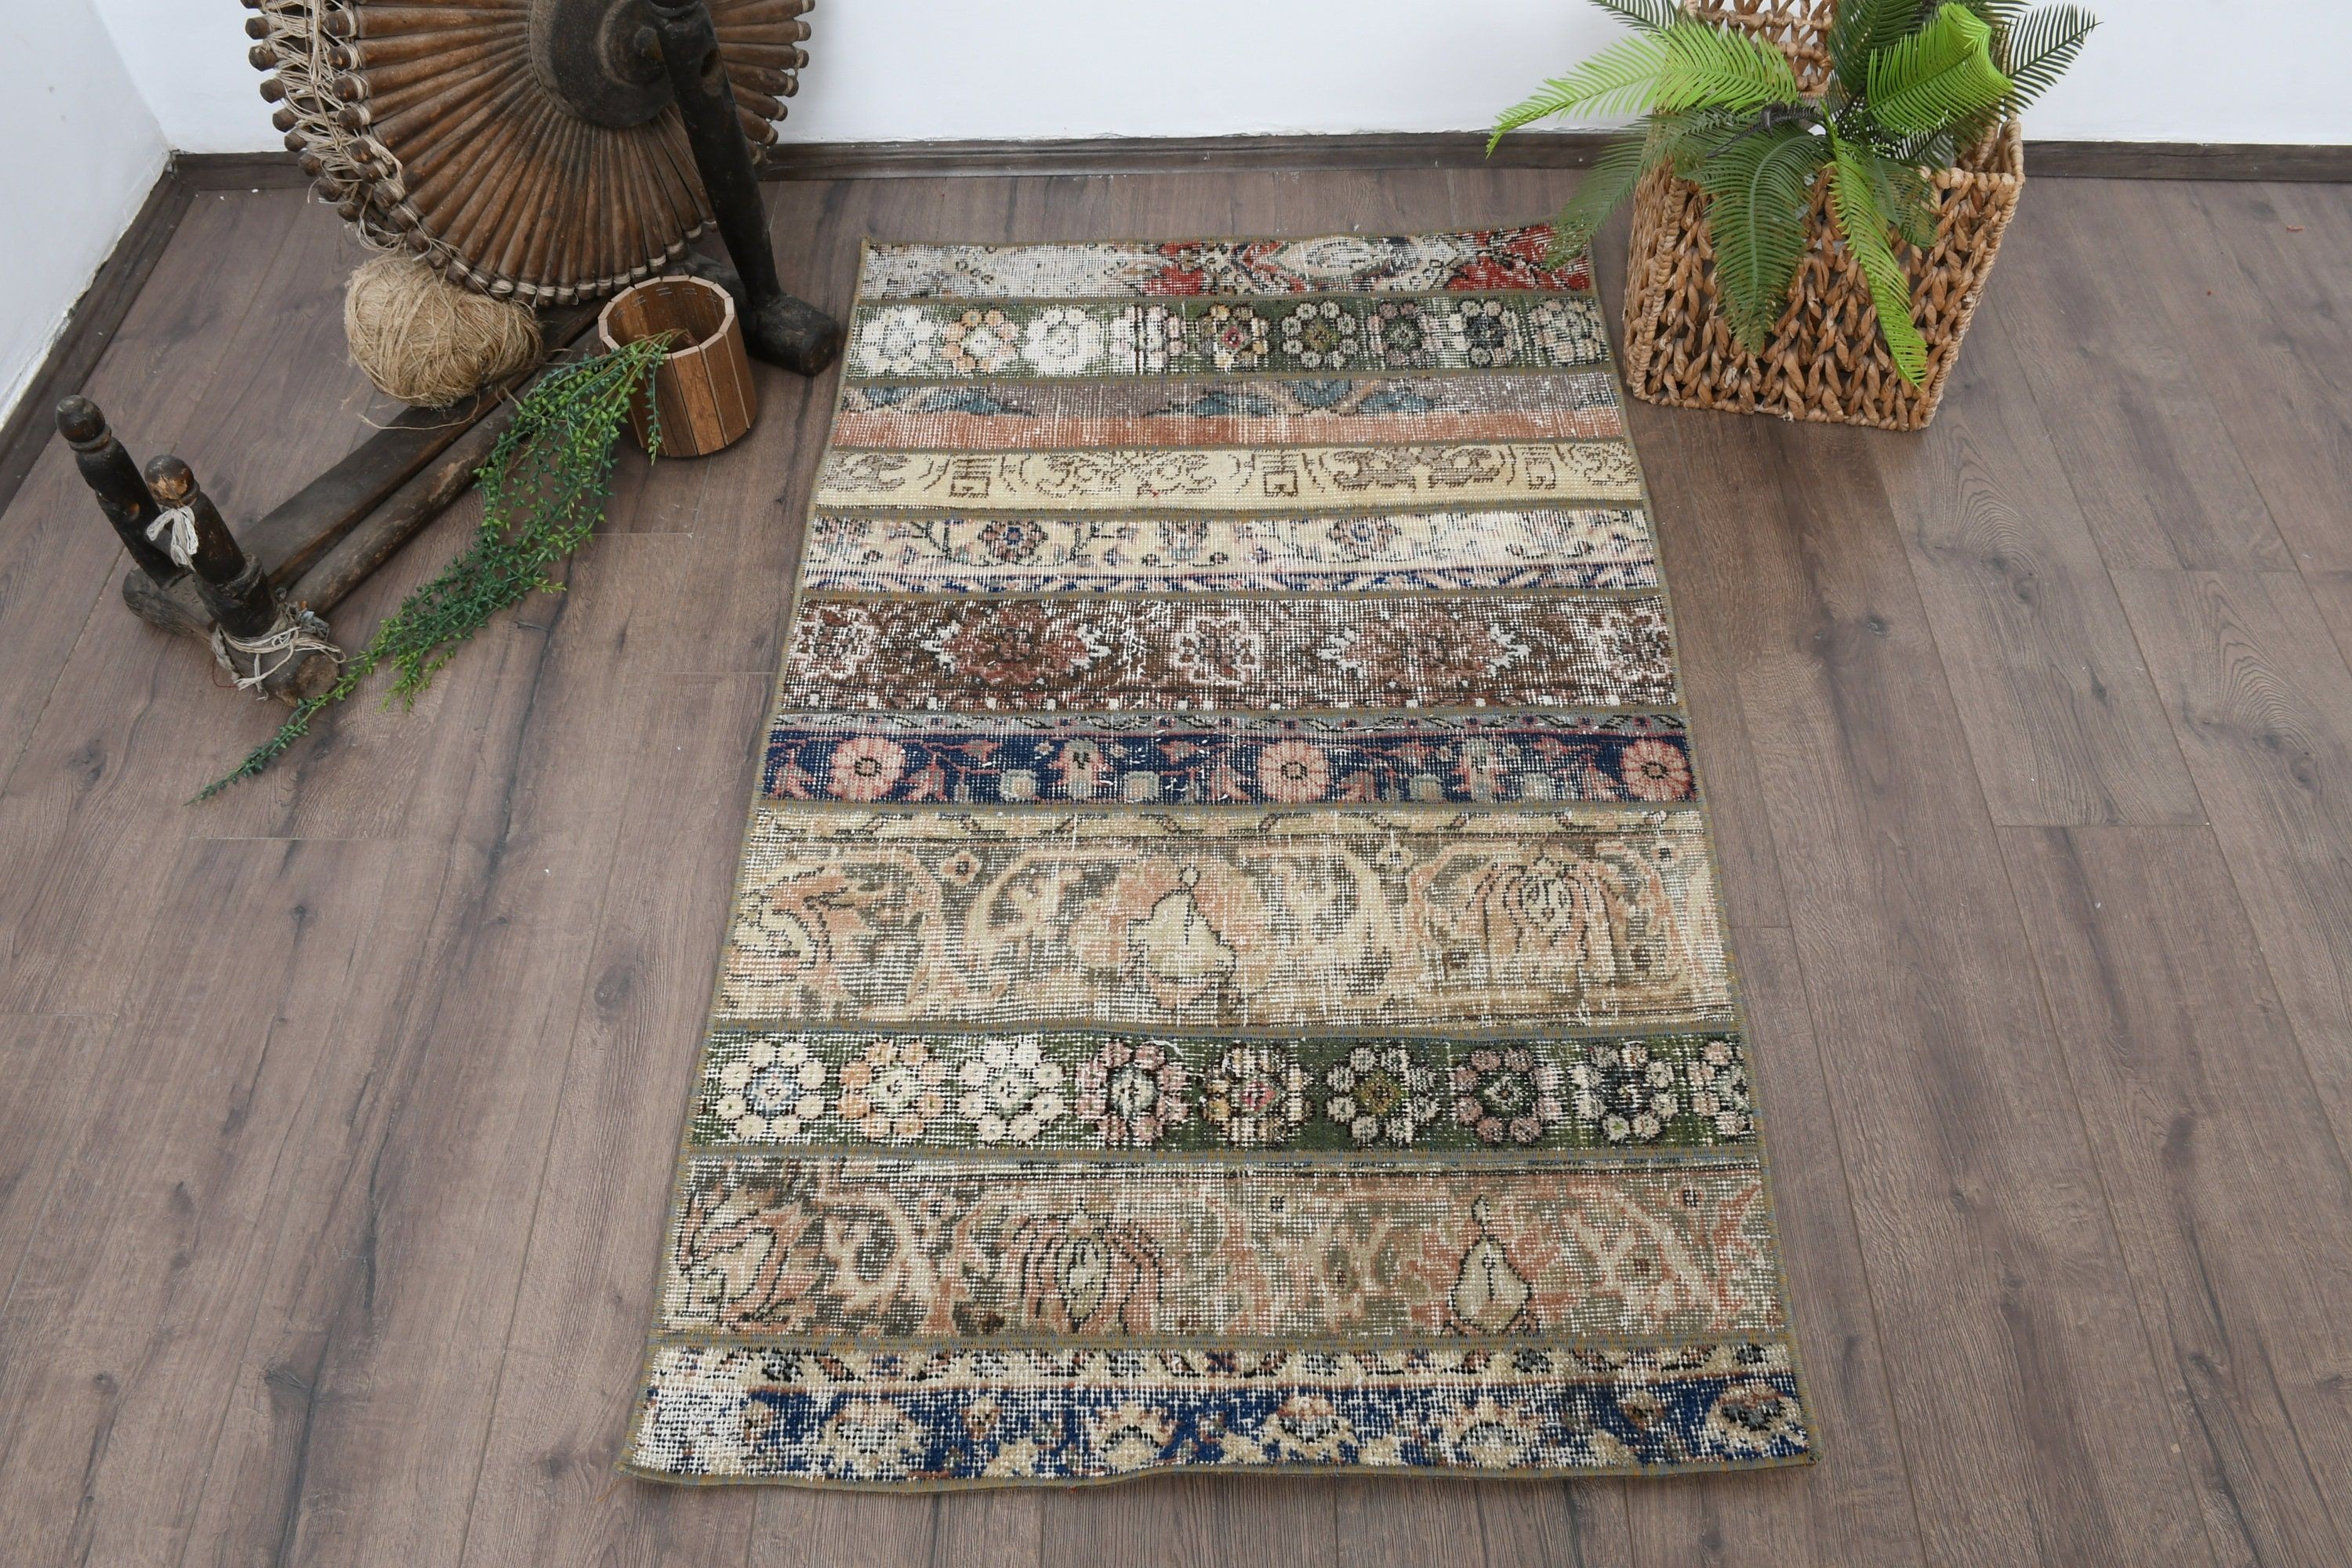 Vintage Rug, Home Decor Rugs, Kitchen Rug, Cool Rug, Green Oriental Rugs, Rugs for Car Mat, 2.6x4.4 ft Small Rug, Bath Rugs, Turkish Rugs